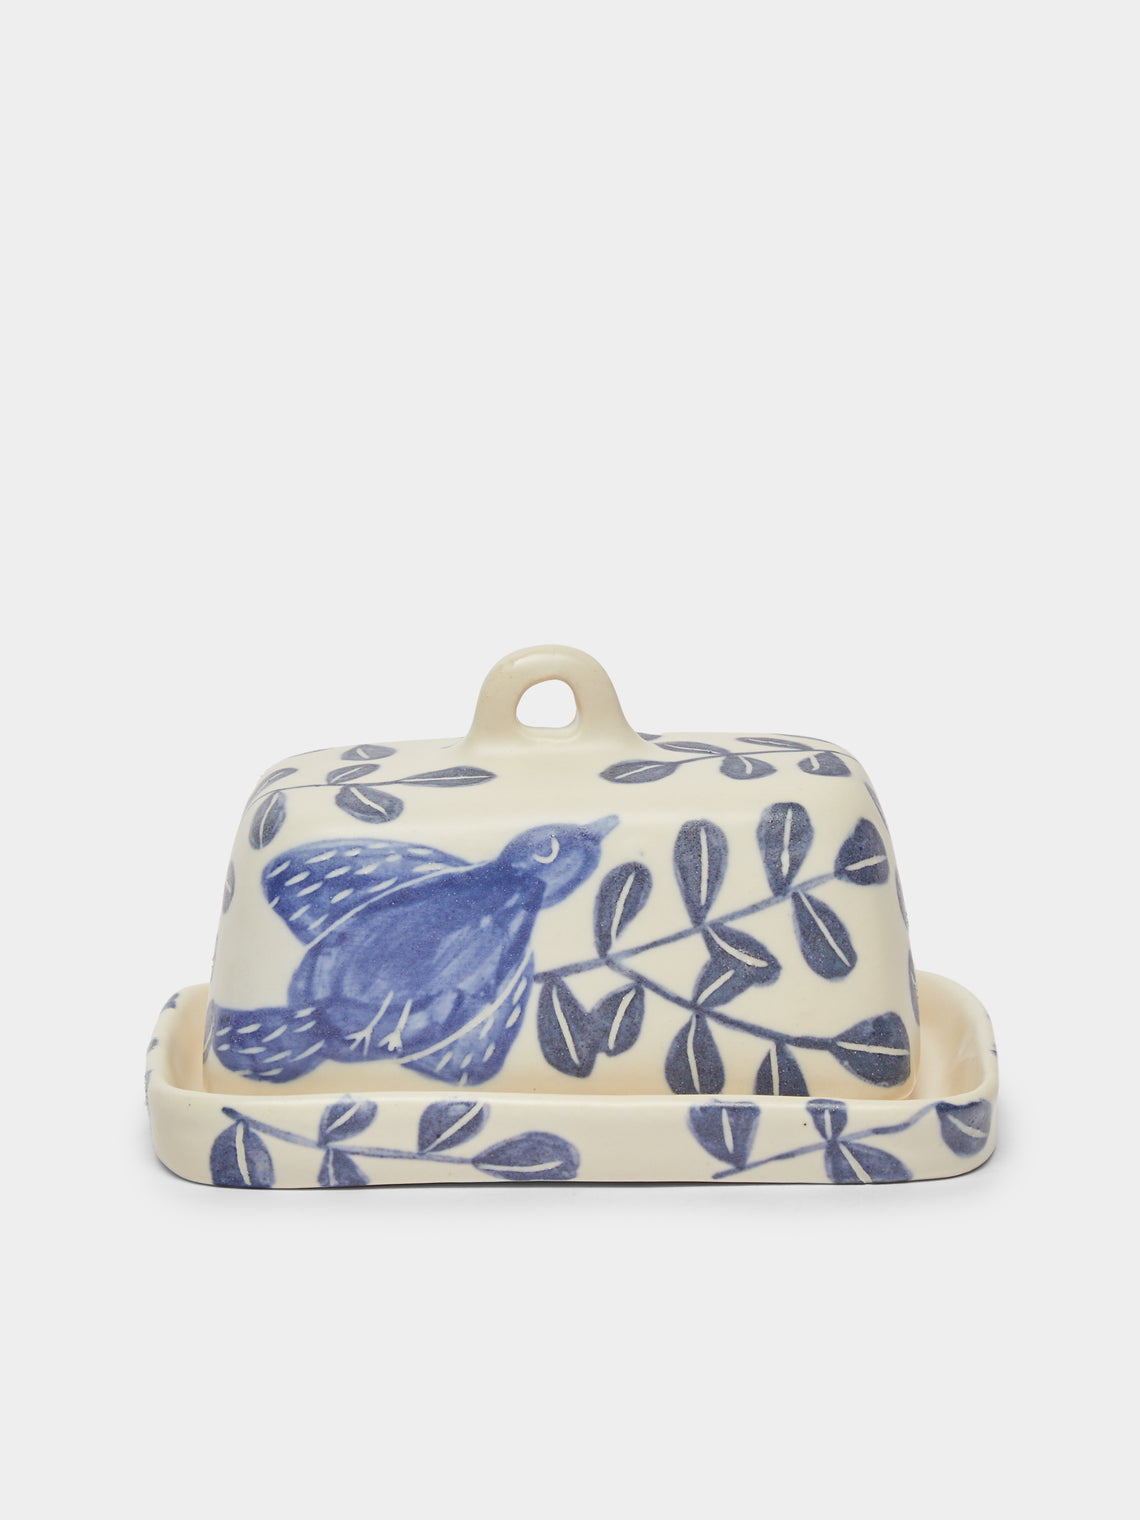 Azul Patagonia - Flying Bird Hand-Painted Ceramic Butter Dish -  - ABASK - 